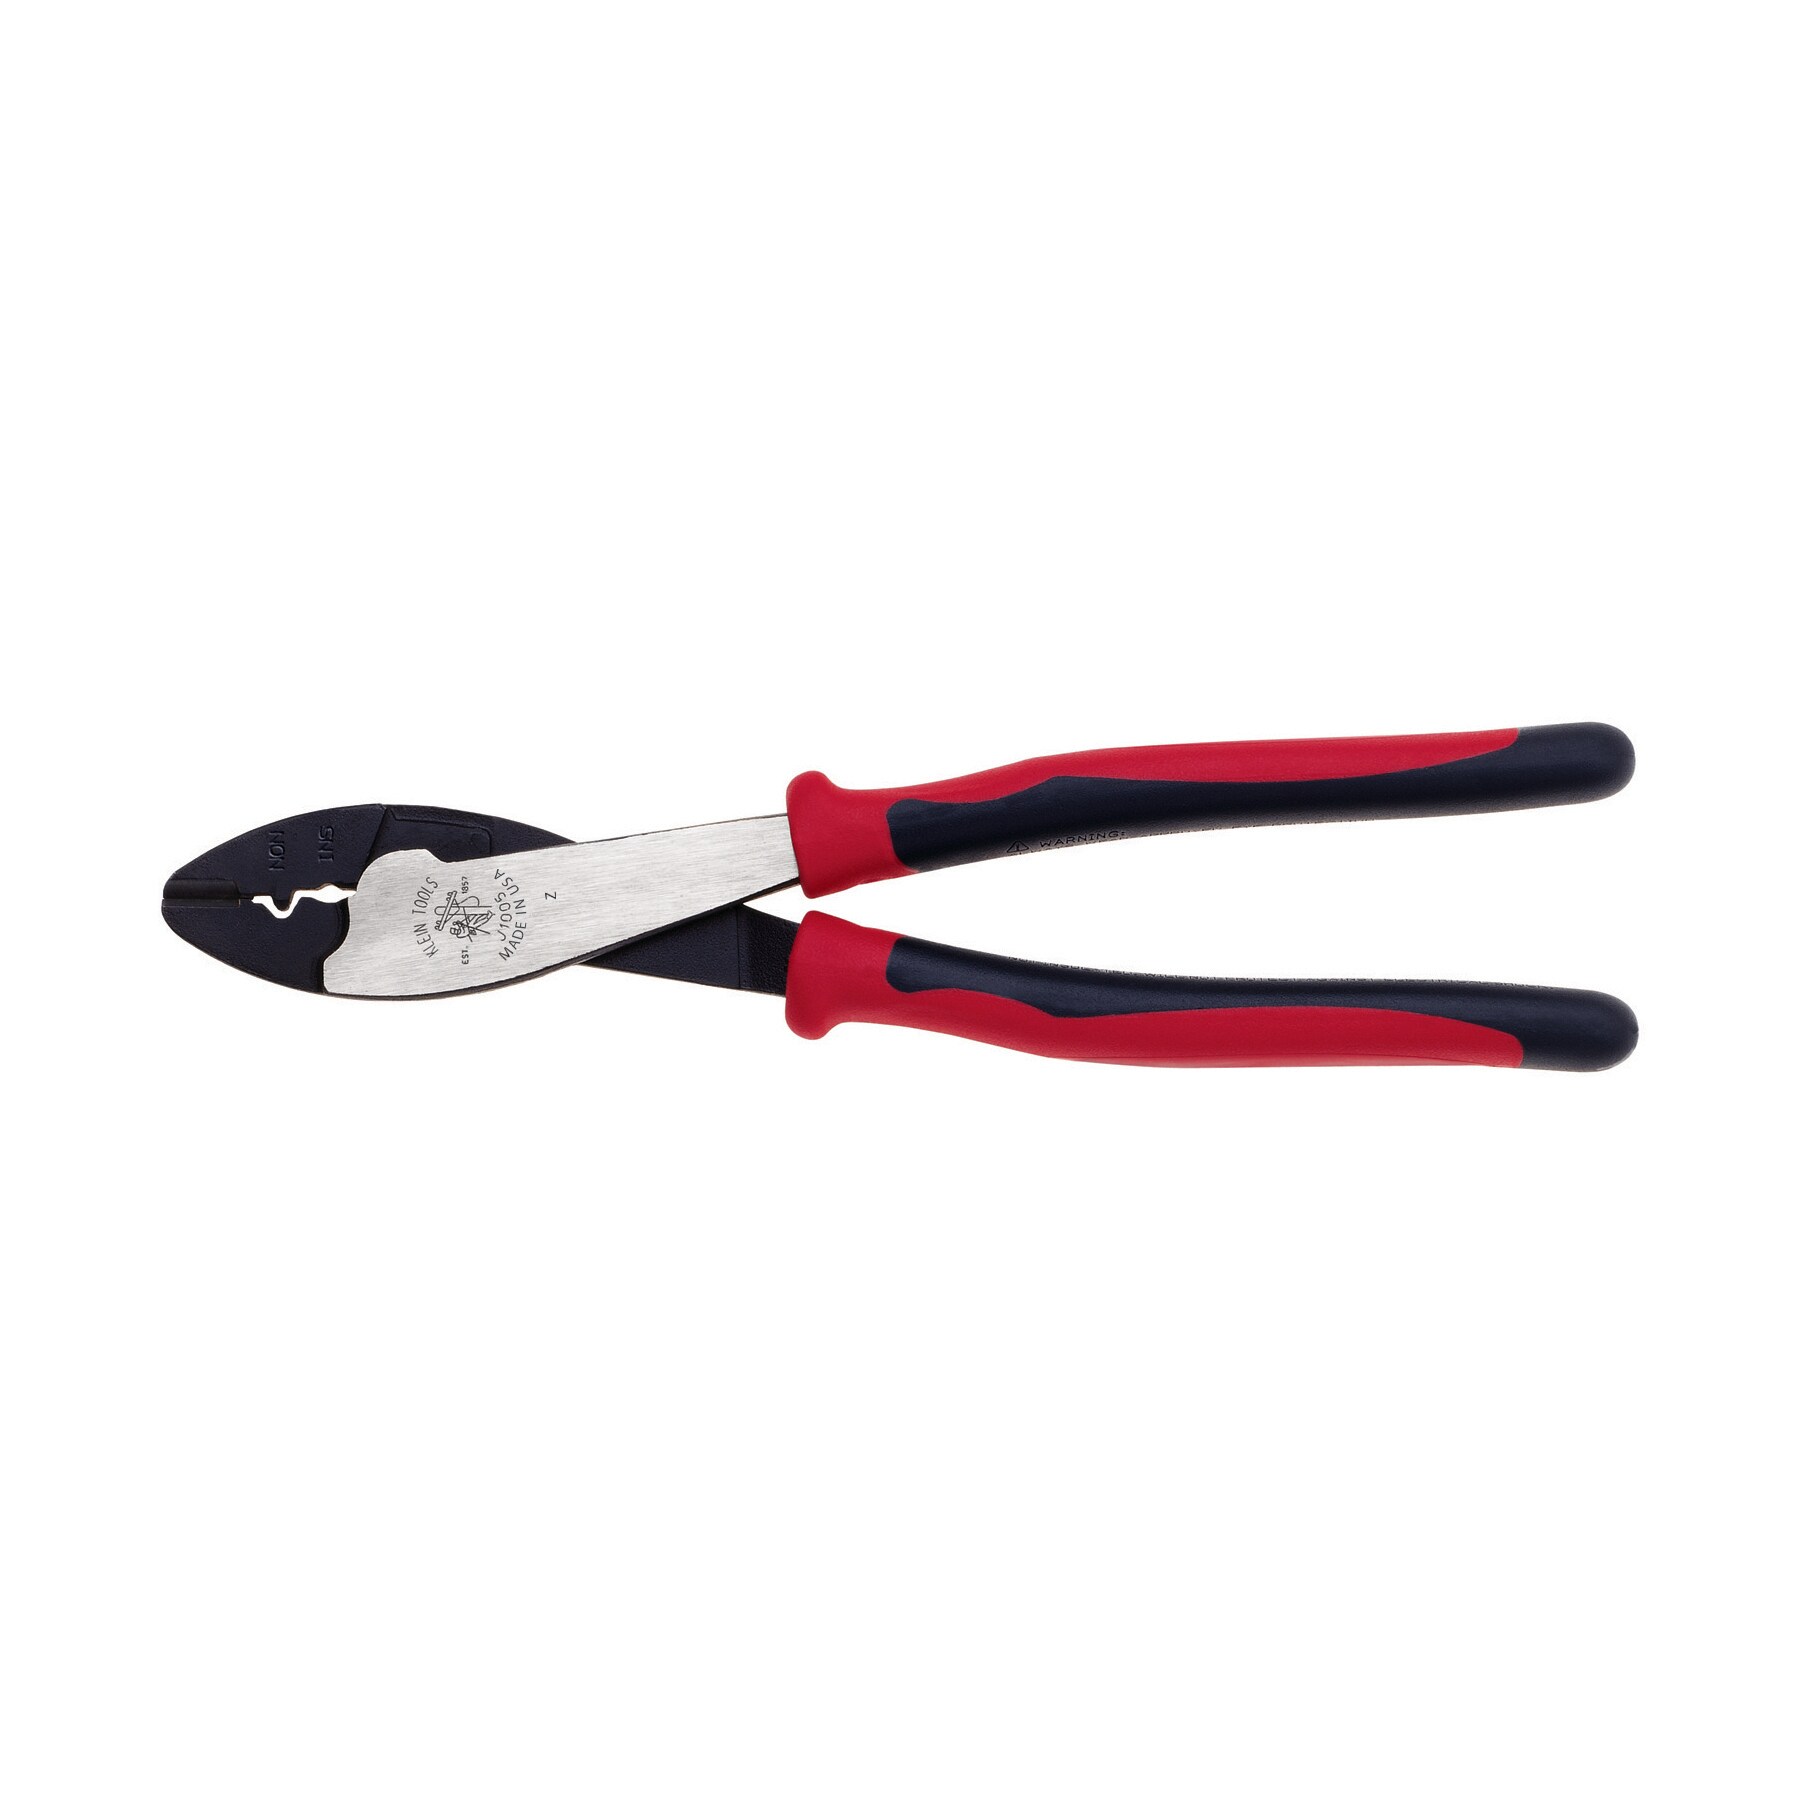 Klein Tools - All-Purpose Pliers with Crimper